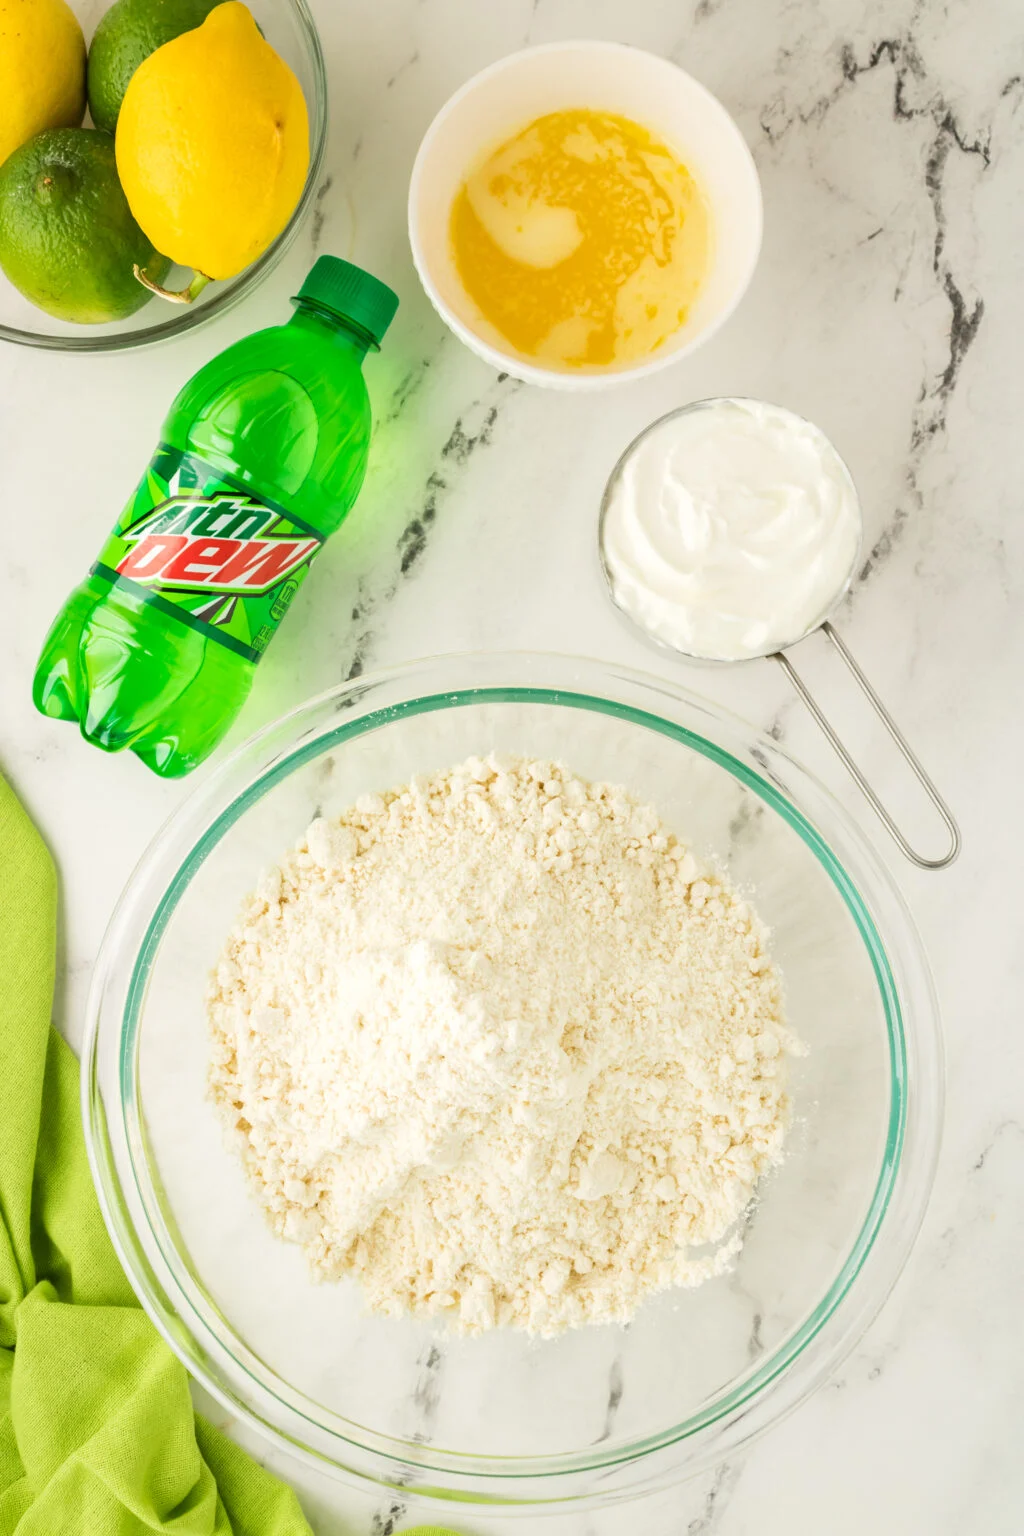 mountain dew biscuit ingredients on a table